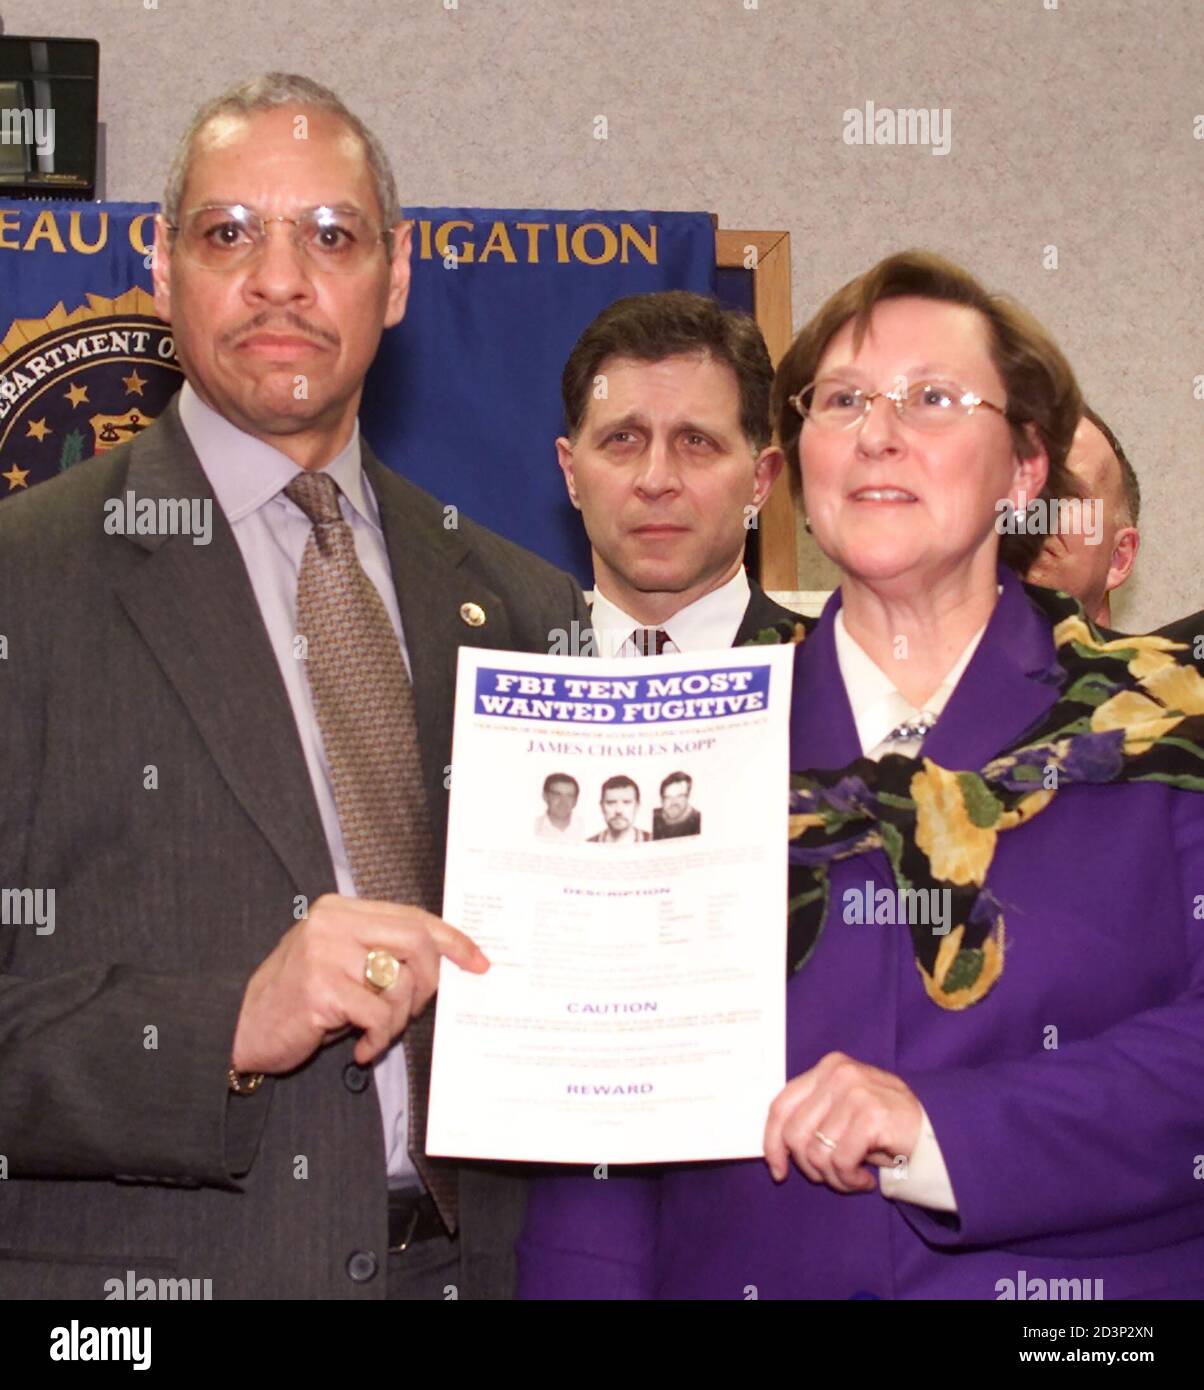 FBI Special Agent in charge Hardrick Crawford Jr. (L), Buffalo Division,  holds up the wanted poster for James Charles Kopp, in Buffalo, March 29,  2001. Kopp, one of the FBI's 10 most